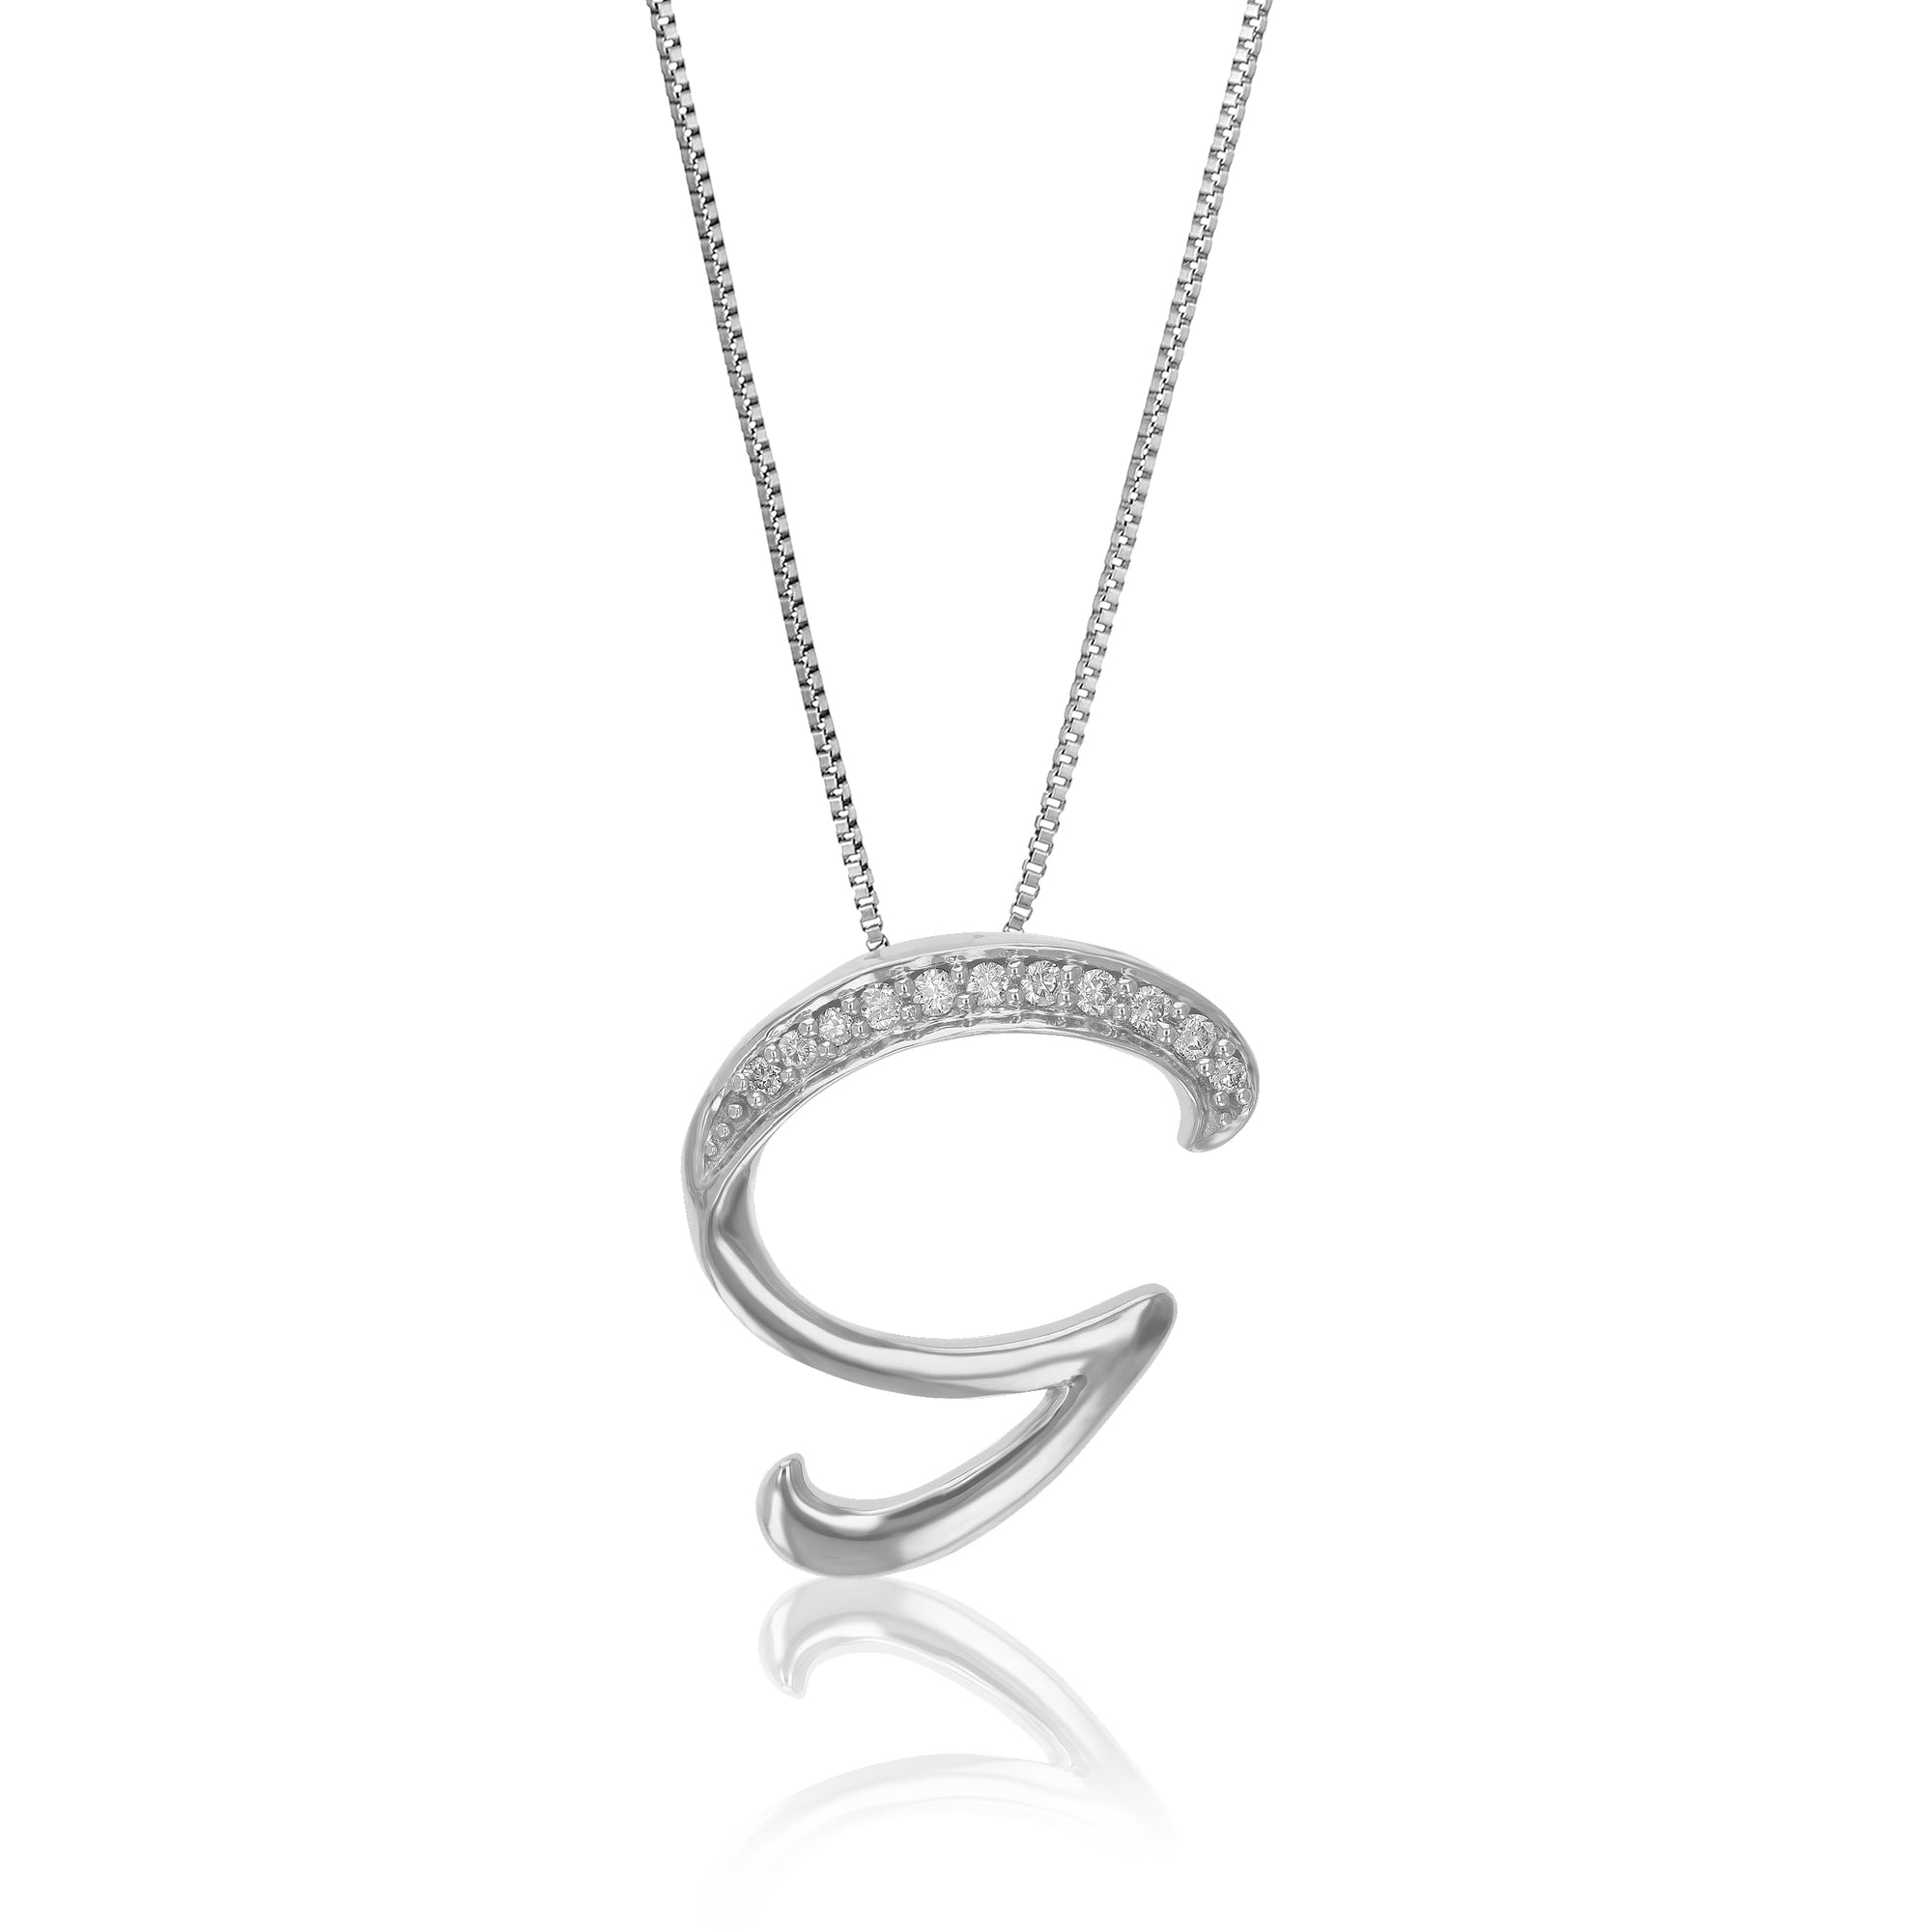 1/12 cttw Diamond Pendant Necklace for Women, Lab Grown Diamond Letter G Pendant Necklace in .925 Sterling Silver with Chain, Size 3/4 Inch